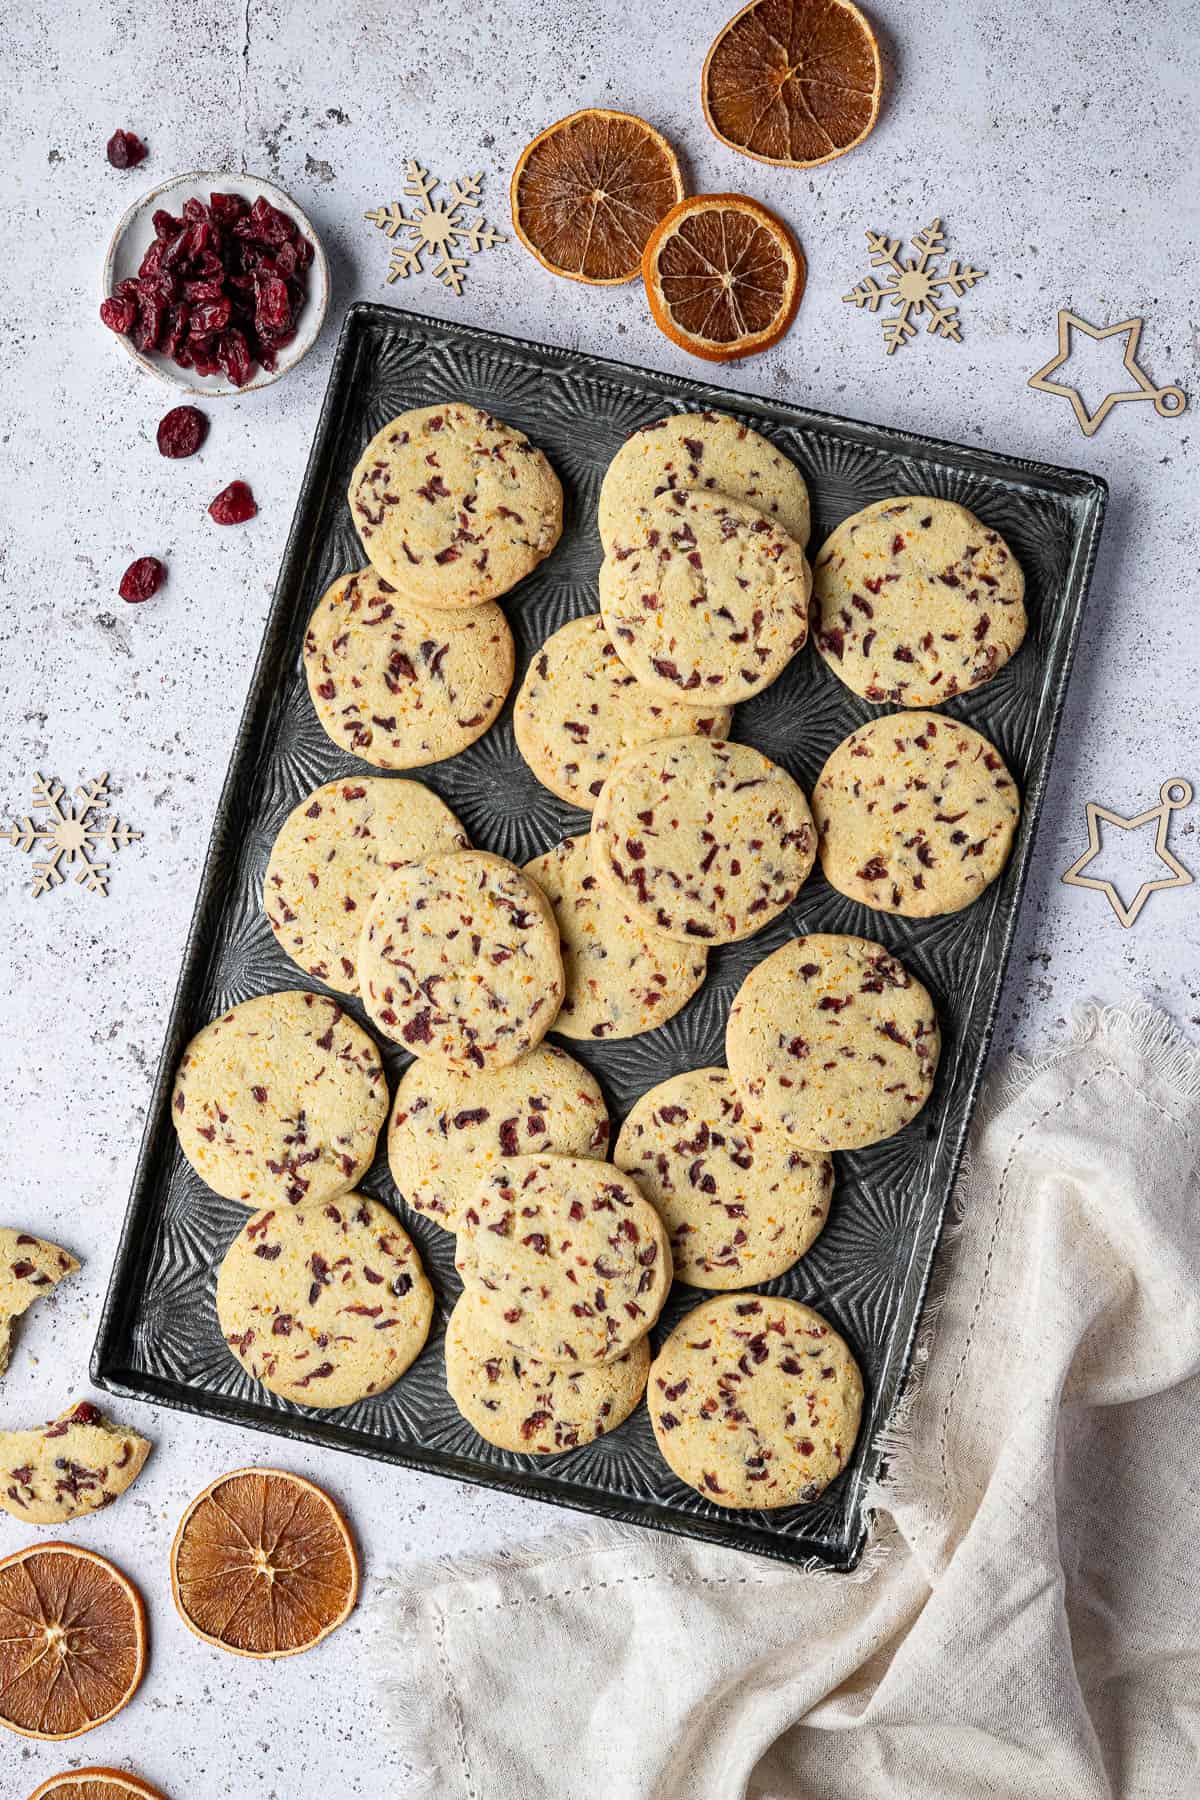 Shortbread cookies on a metal tray with dried orange slices, cranberries and Christmas ornaments.